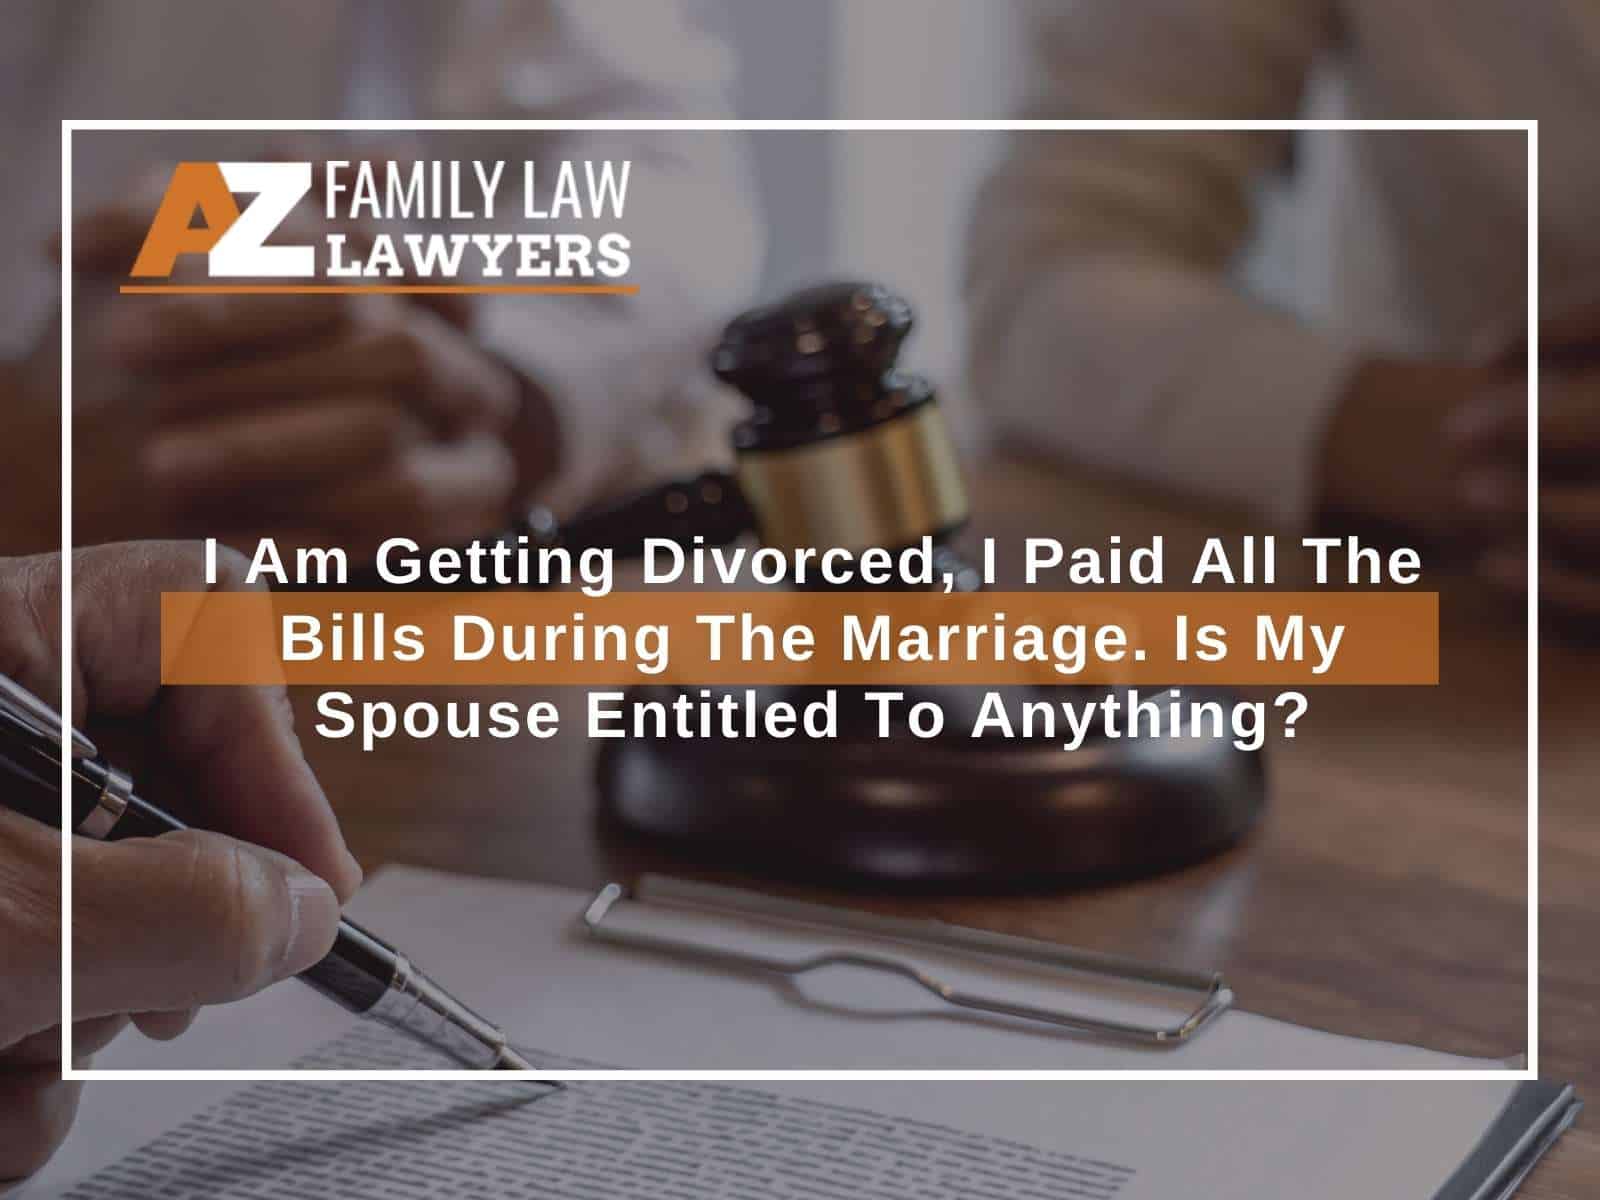 I Am Getting Divorced, I Paid All The Bills During The Marriage. Is My Spouse Entitled To Anything